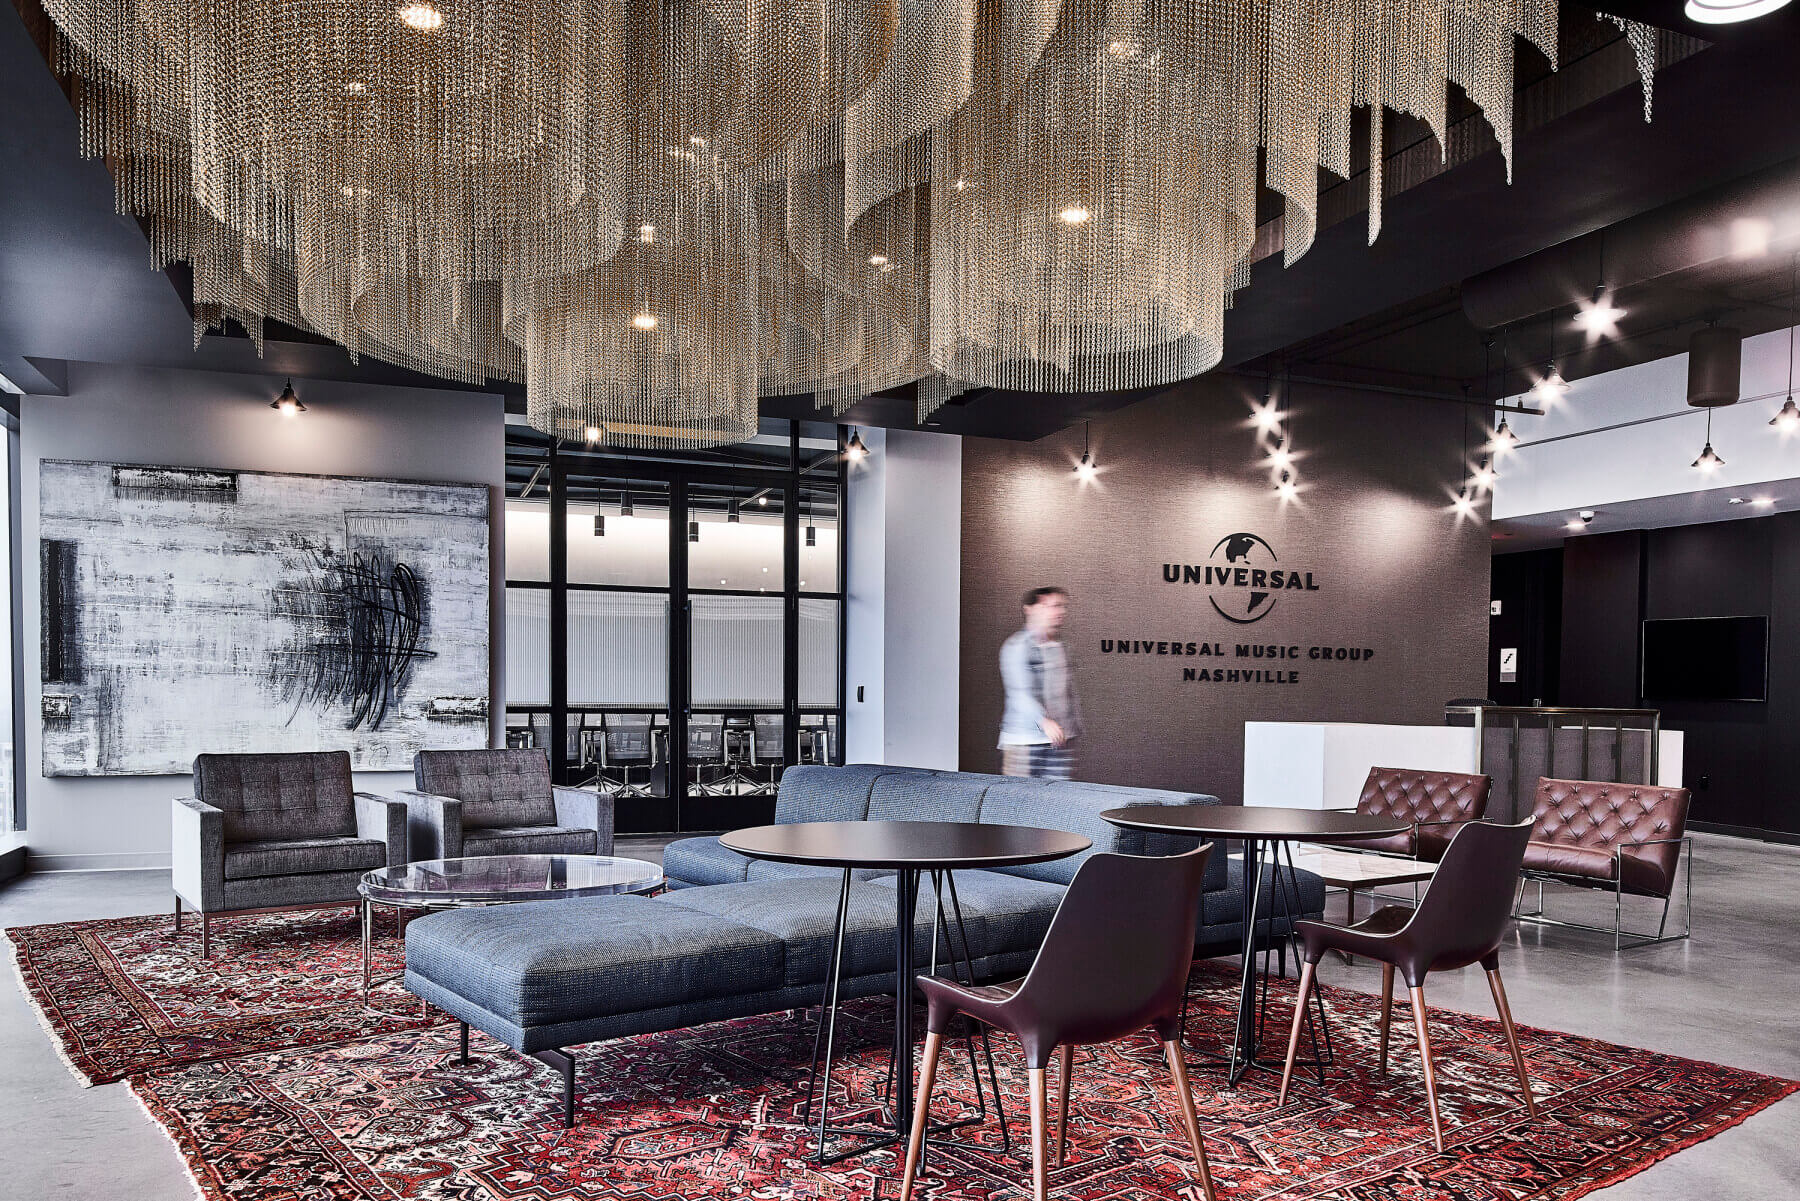 The main lobby and reception area in the Universal Music Group Nashville offices